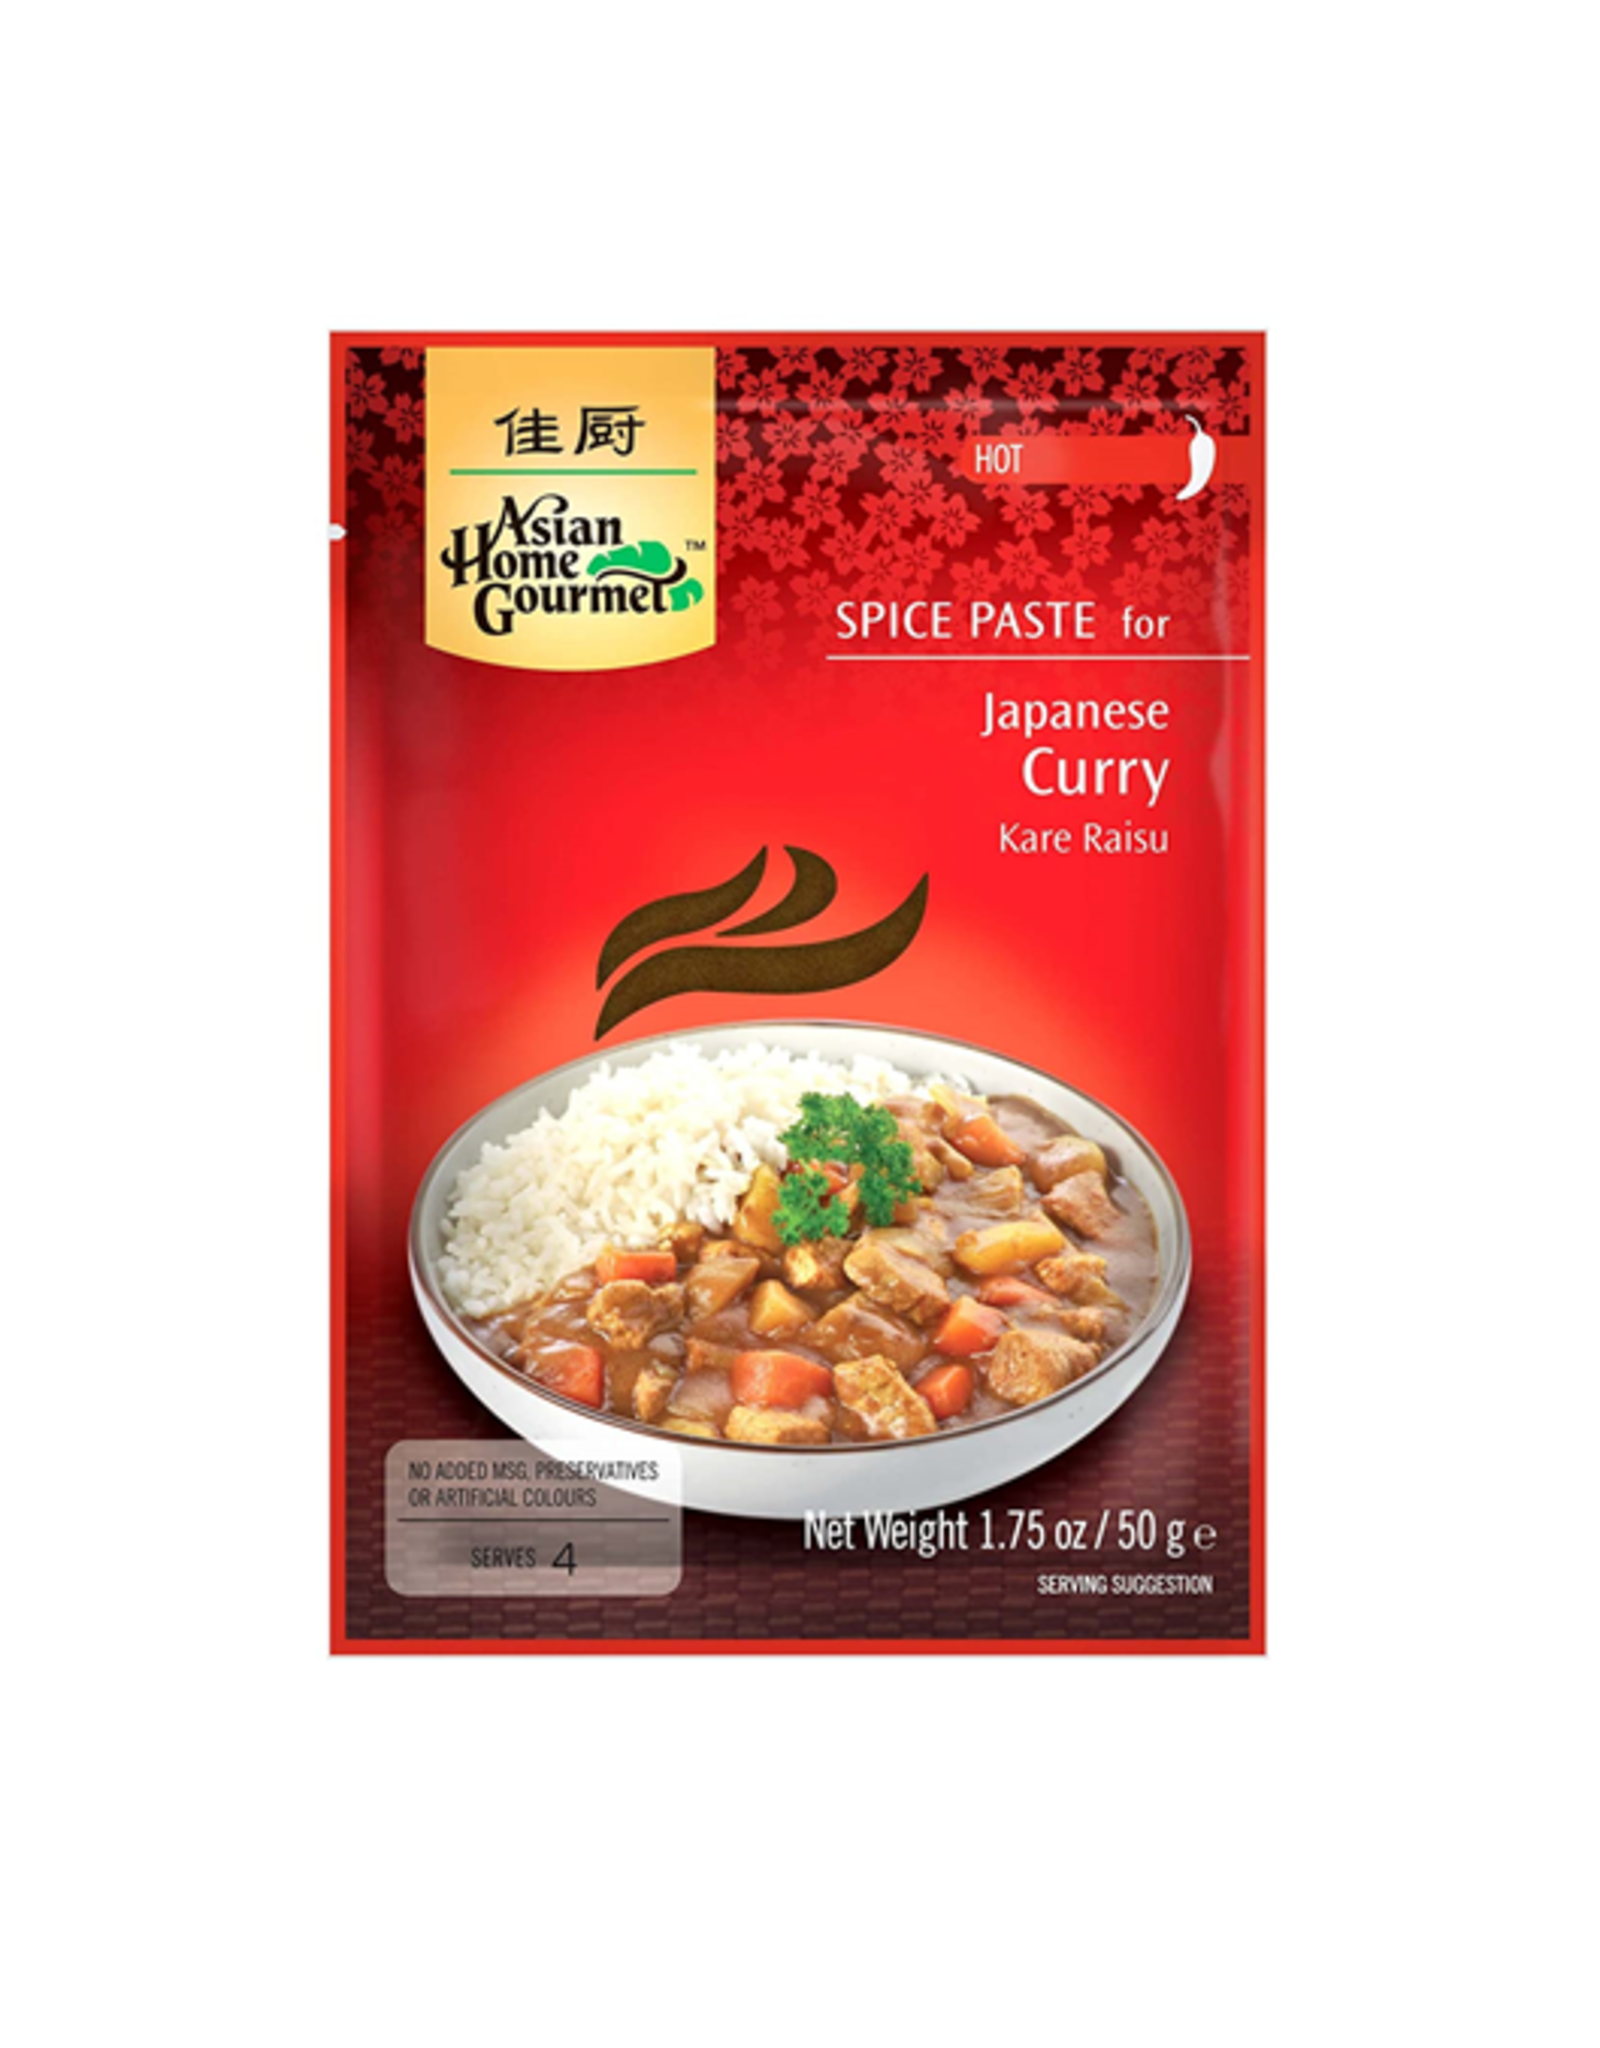 Asian Home Gourmet Japanese Curry